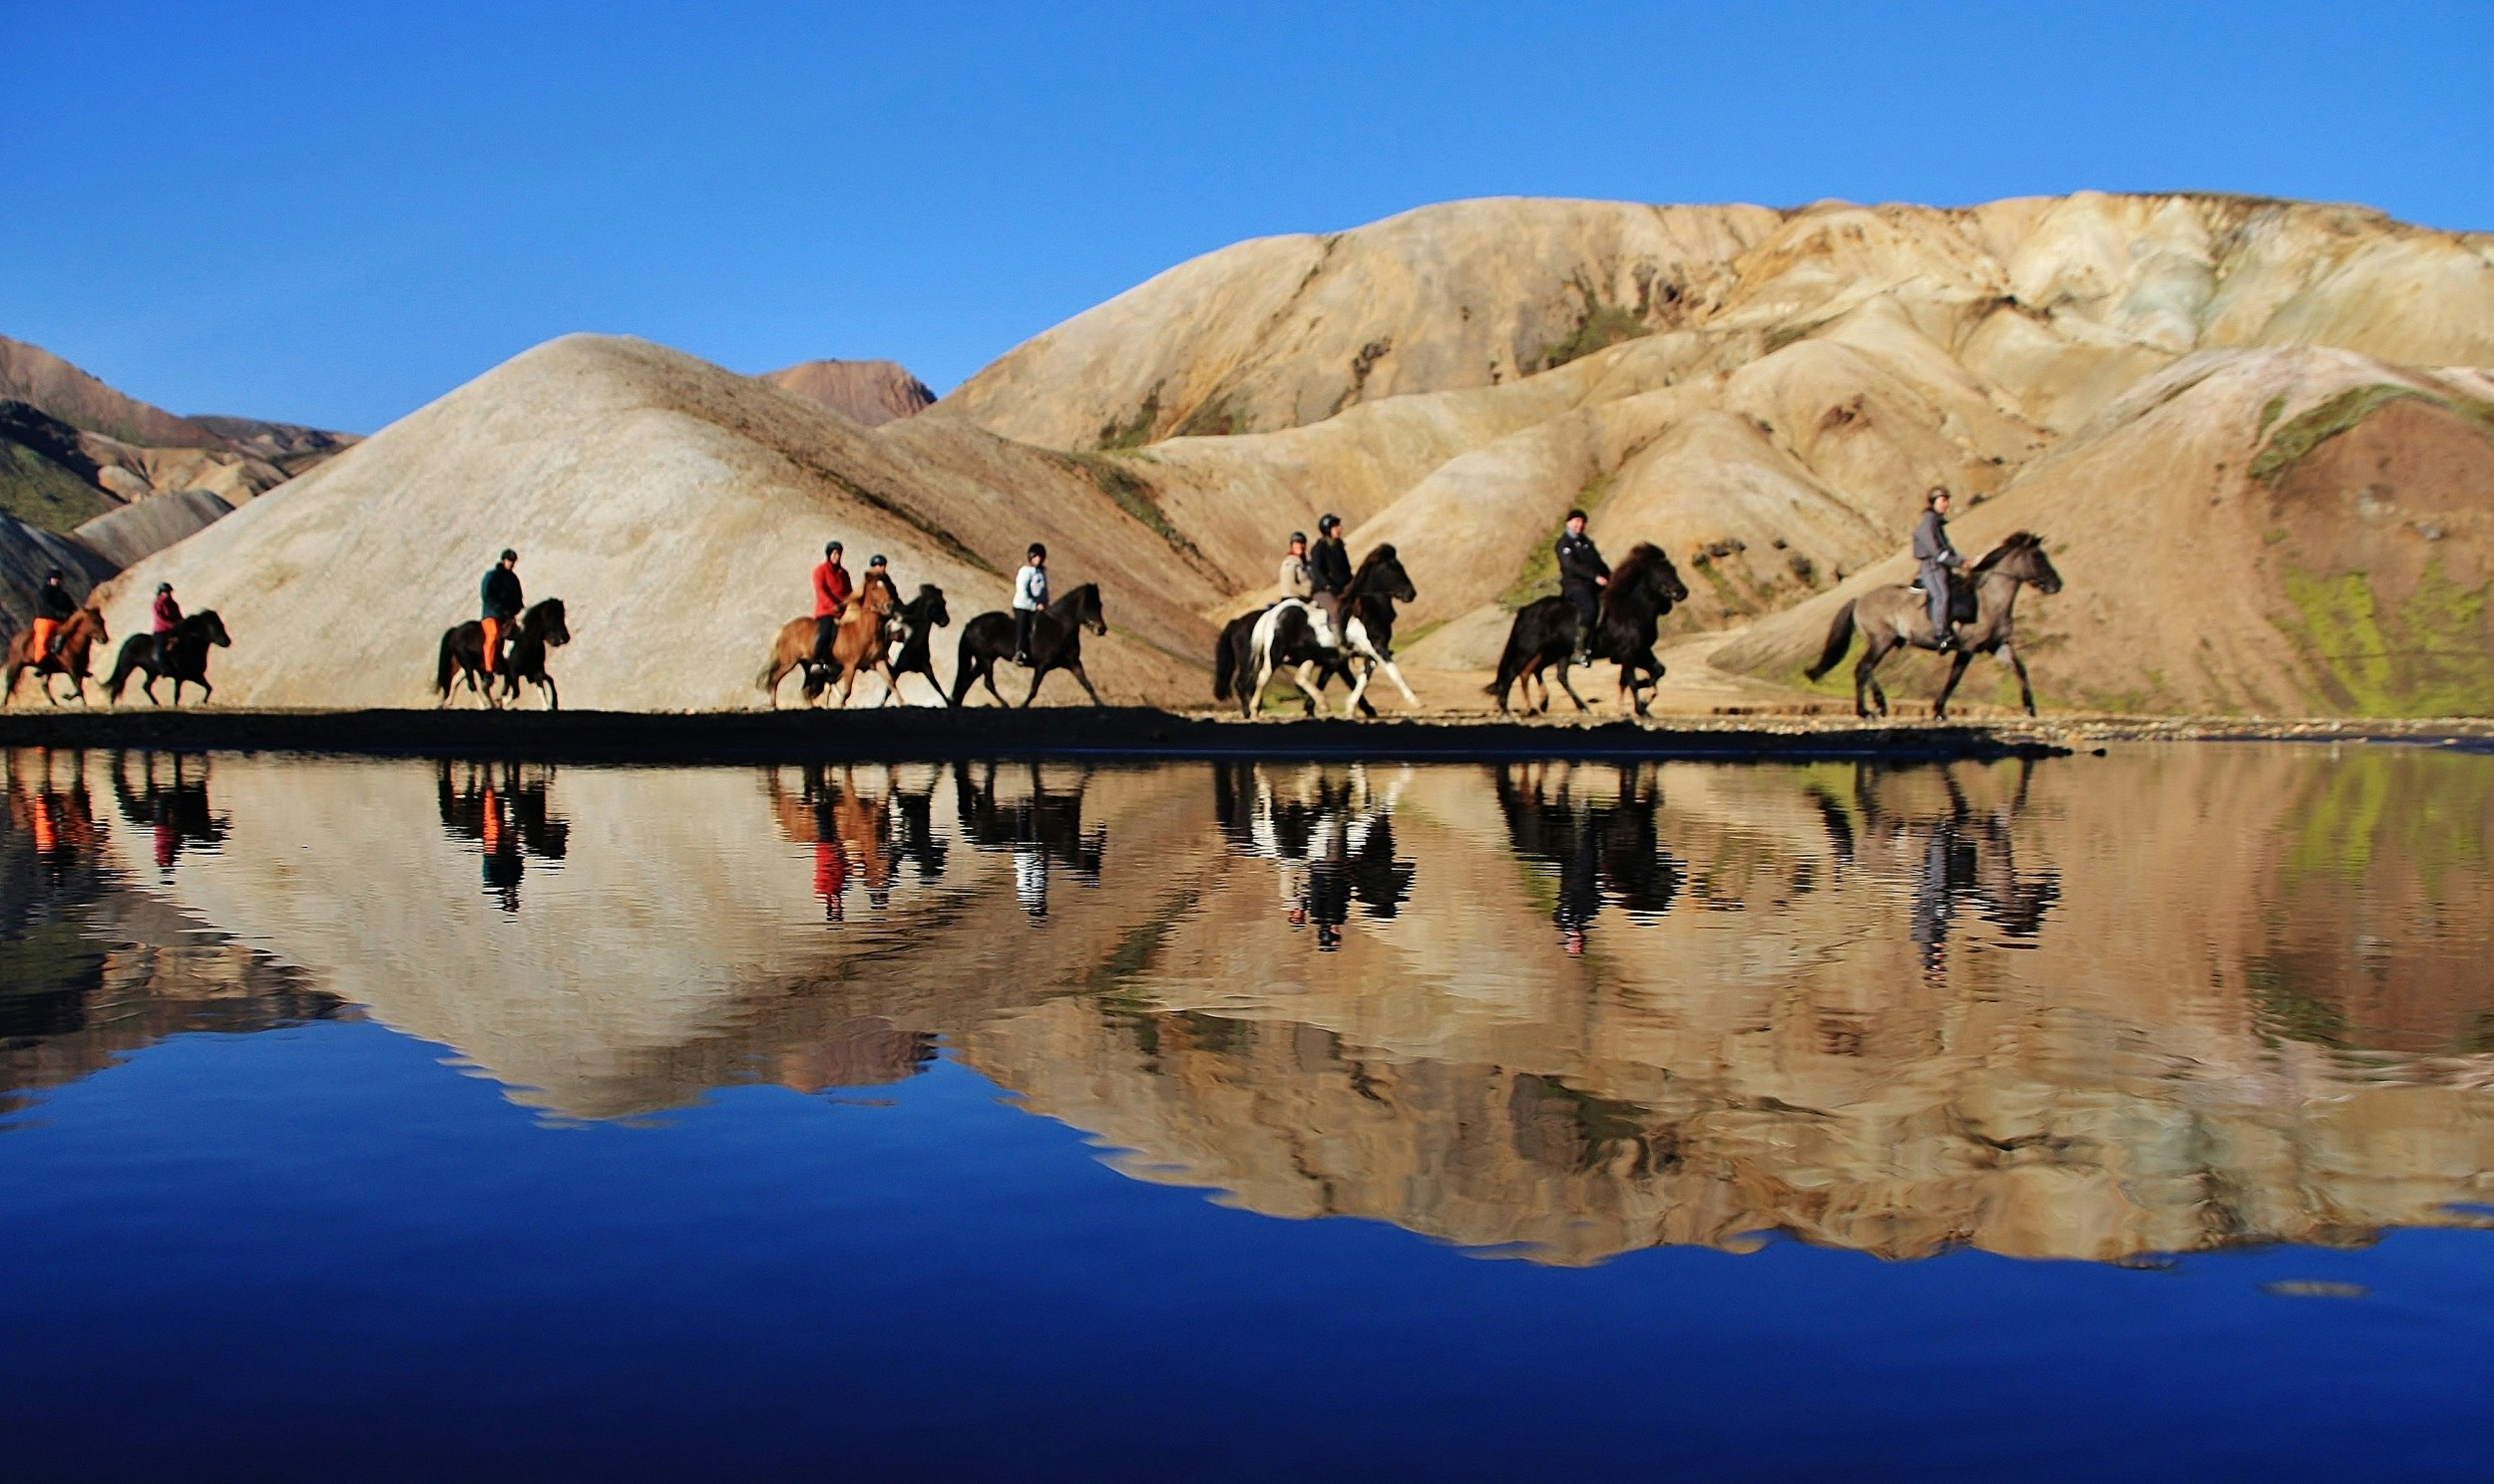 A dozen people on horseback make their way along a mirror-calm lake, with their reflections showing perfectly; behind them are some barren, tan-coloured hills.